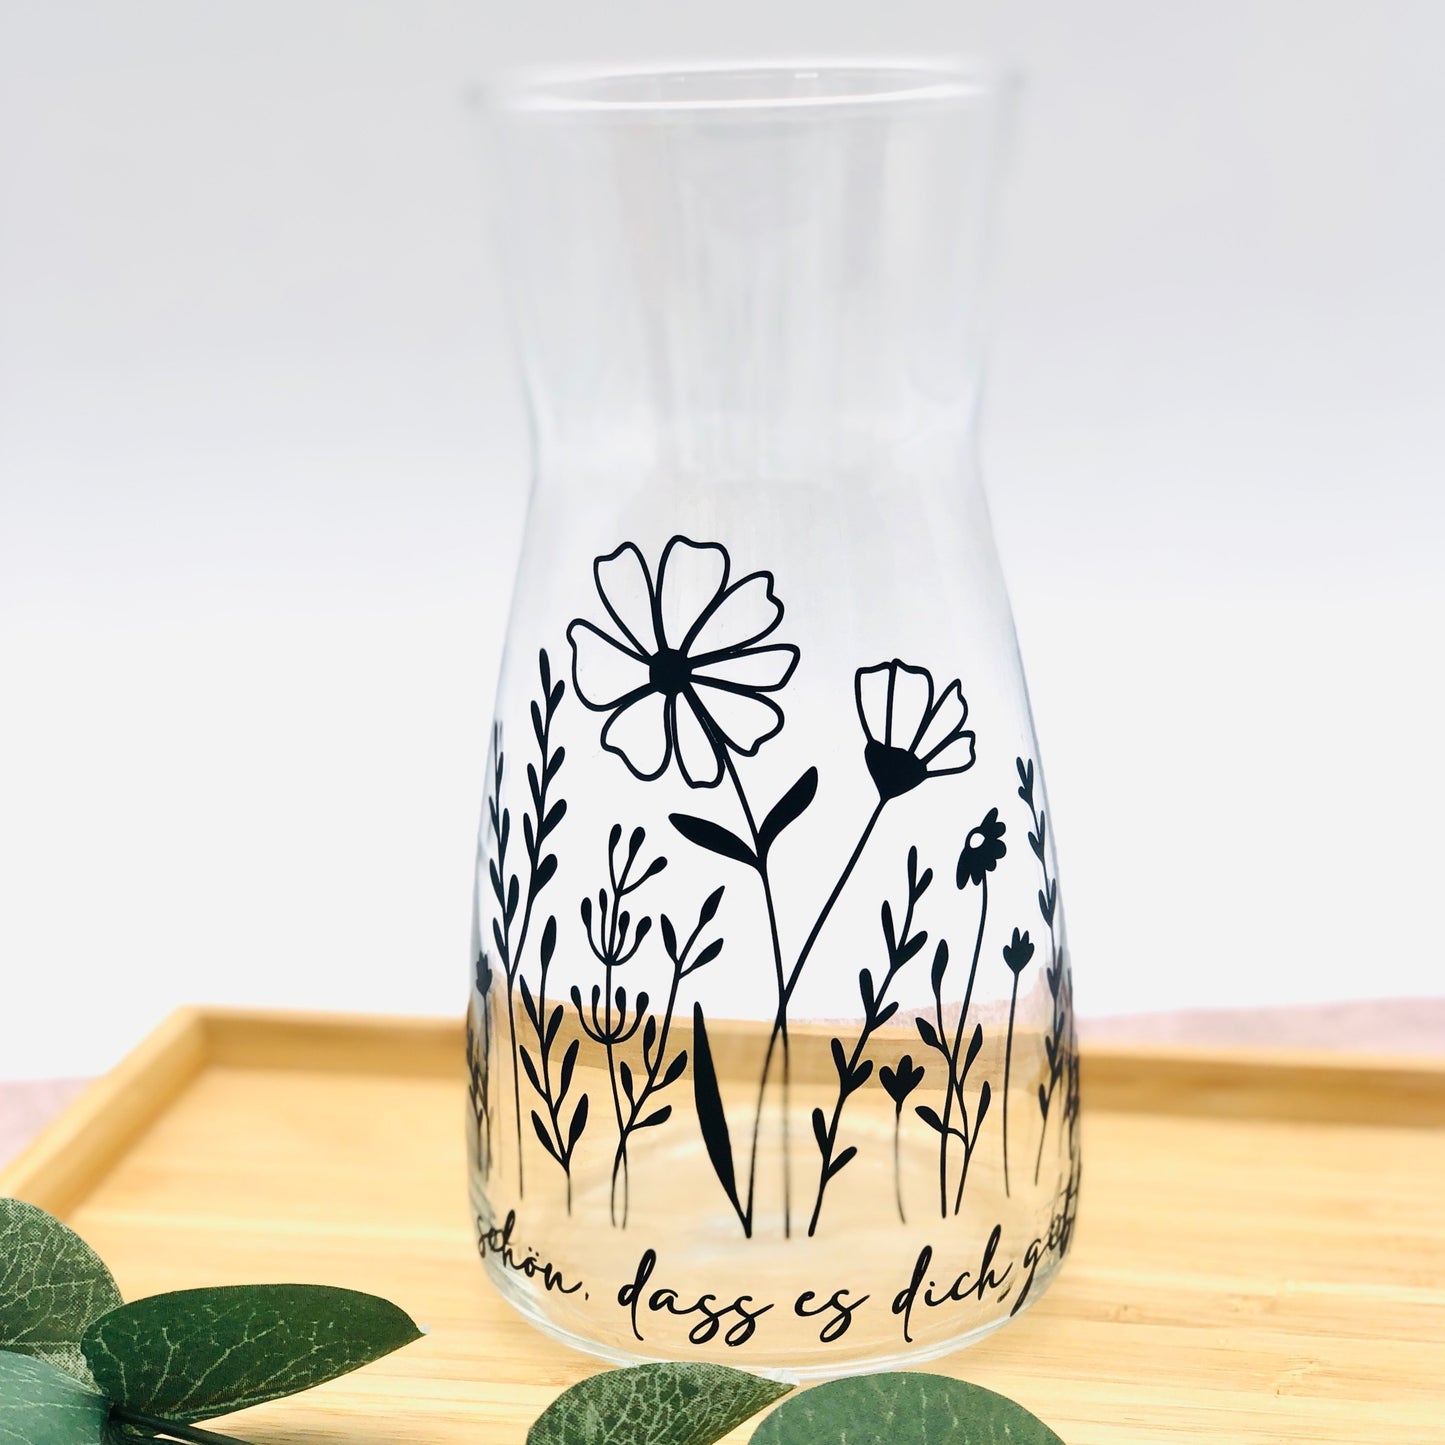 Flower vase personalized with flower meadow - glass vase gift birthday, Mother's Day, anniversary - table decoration - water carafe - vase